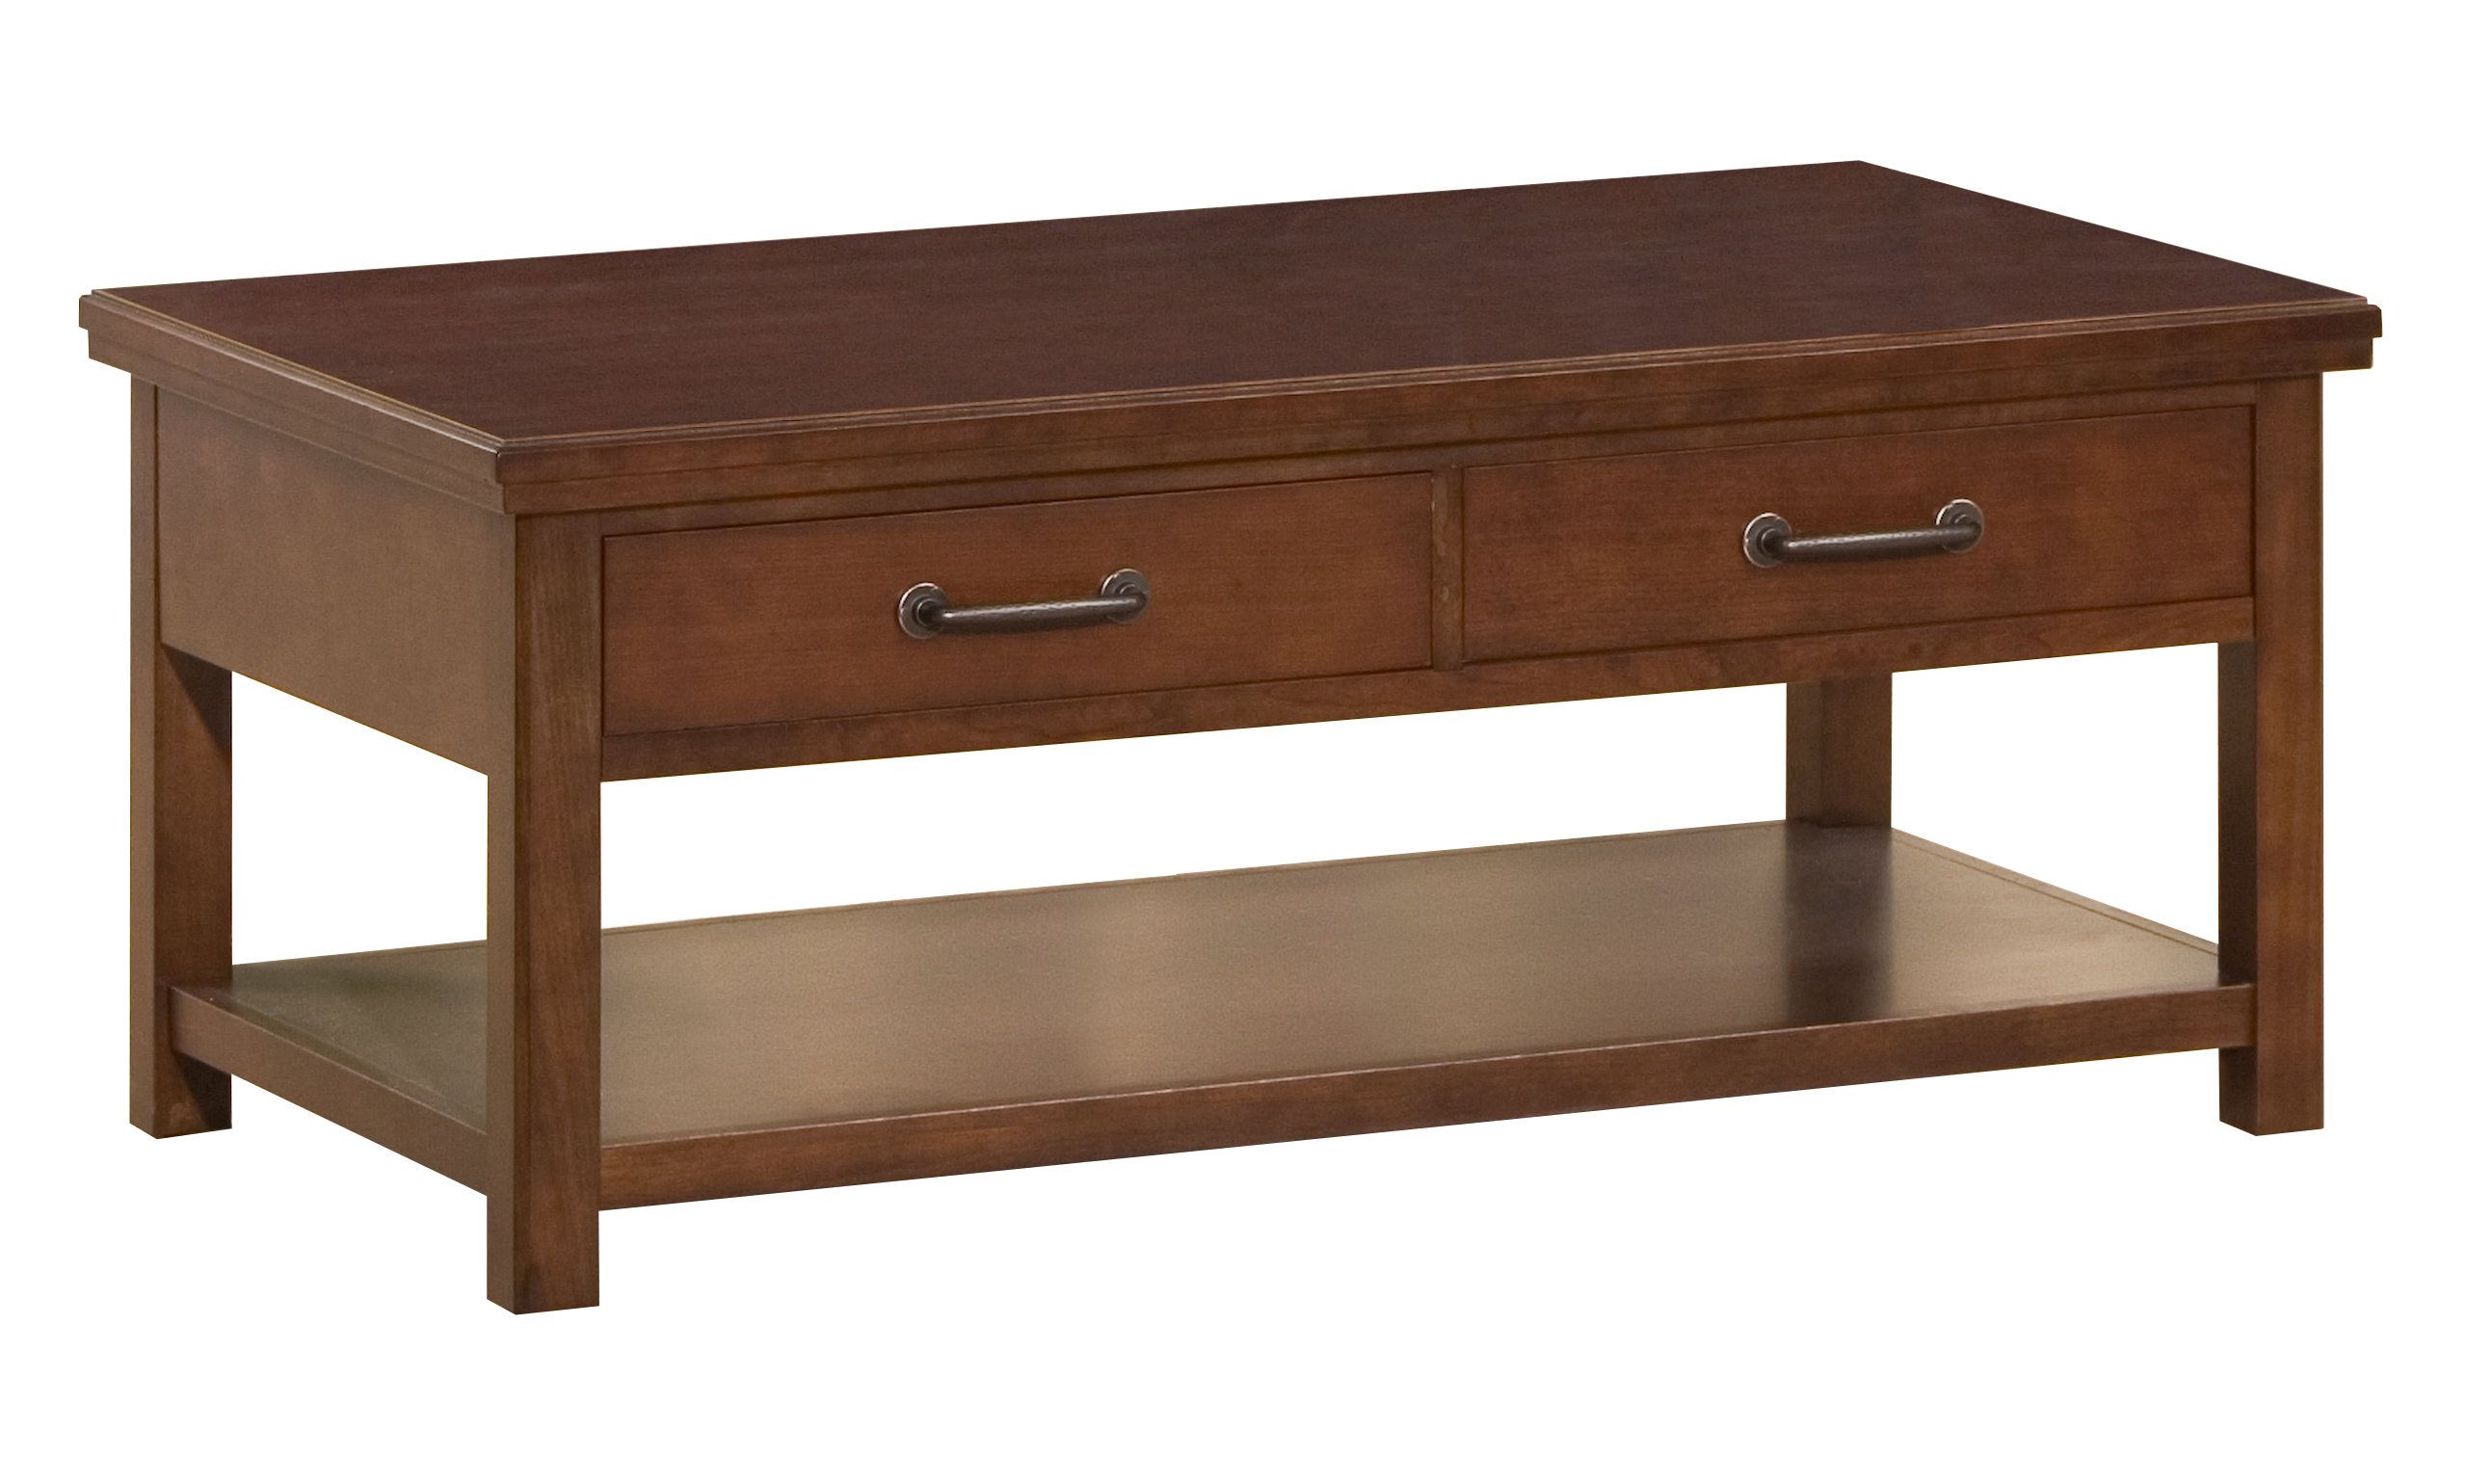 Darby Home Co Boonville Traditional Coffee Table Throughout 2019 Tillman Rectangle Lift Top Cocktail Tables (View 12 of 20)